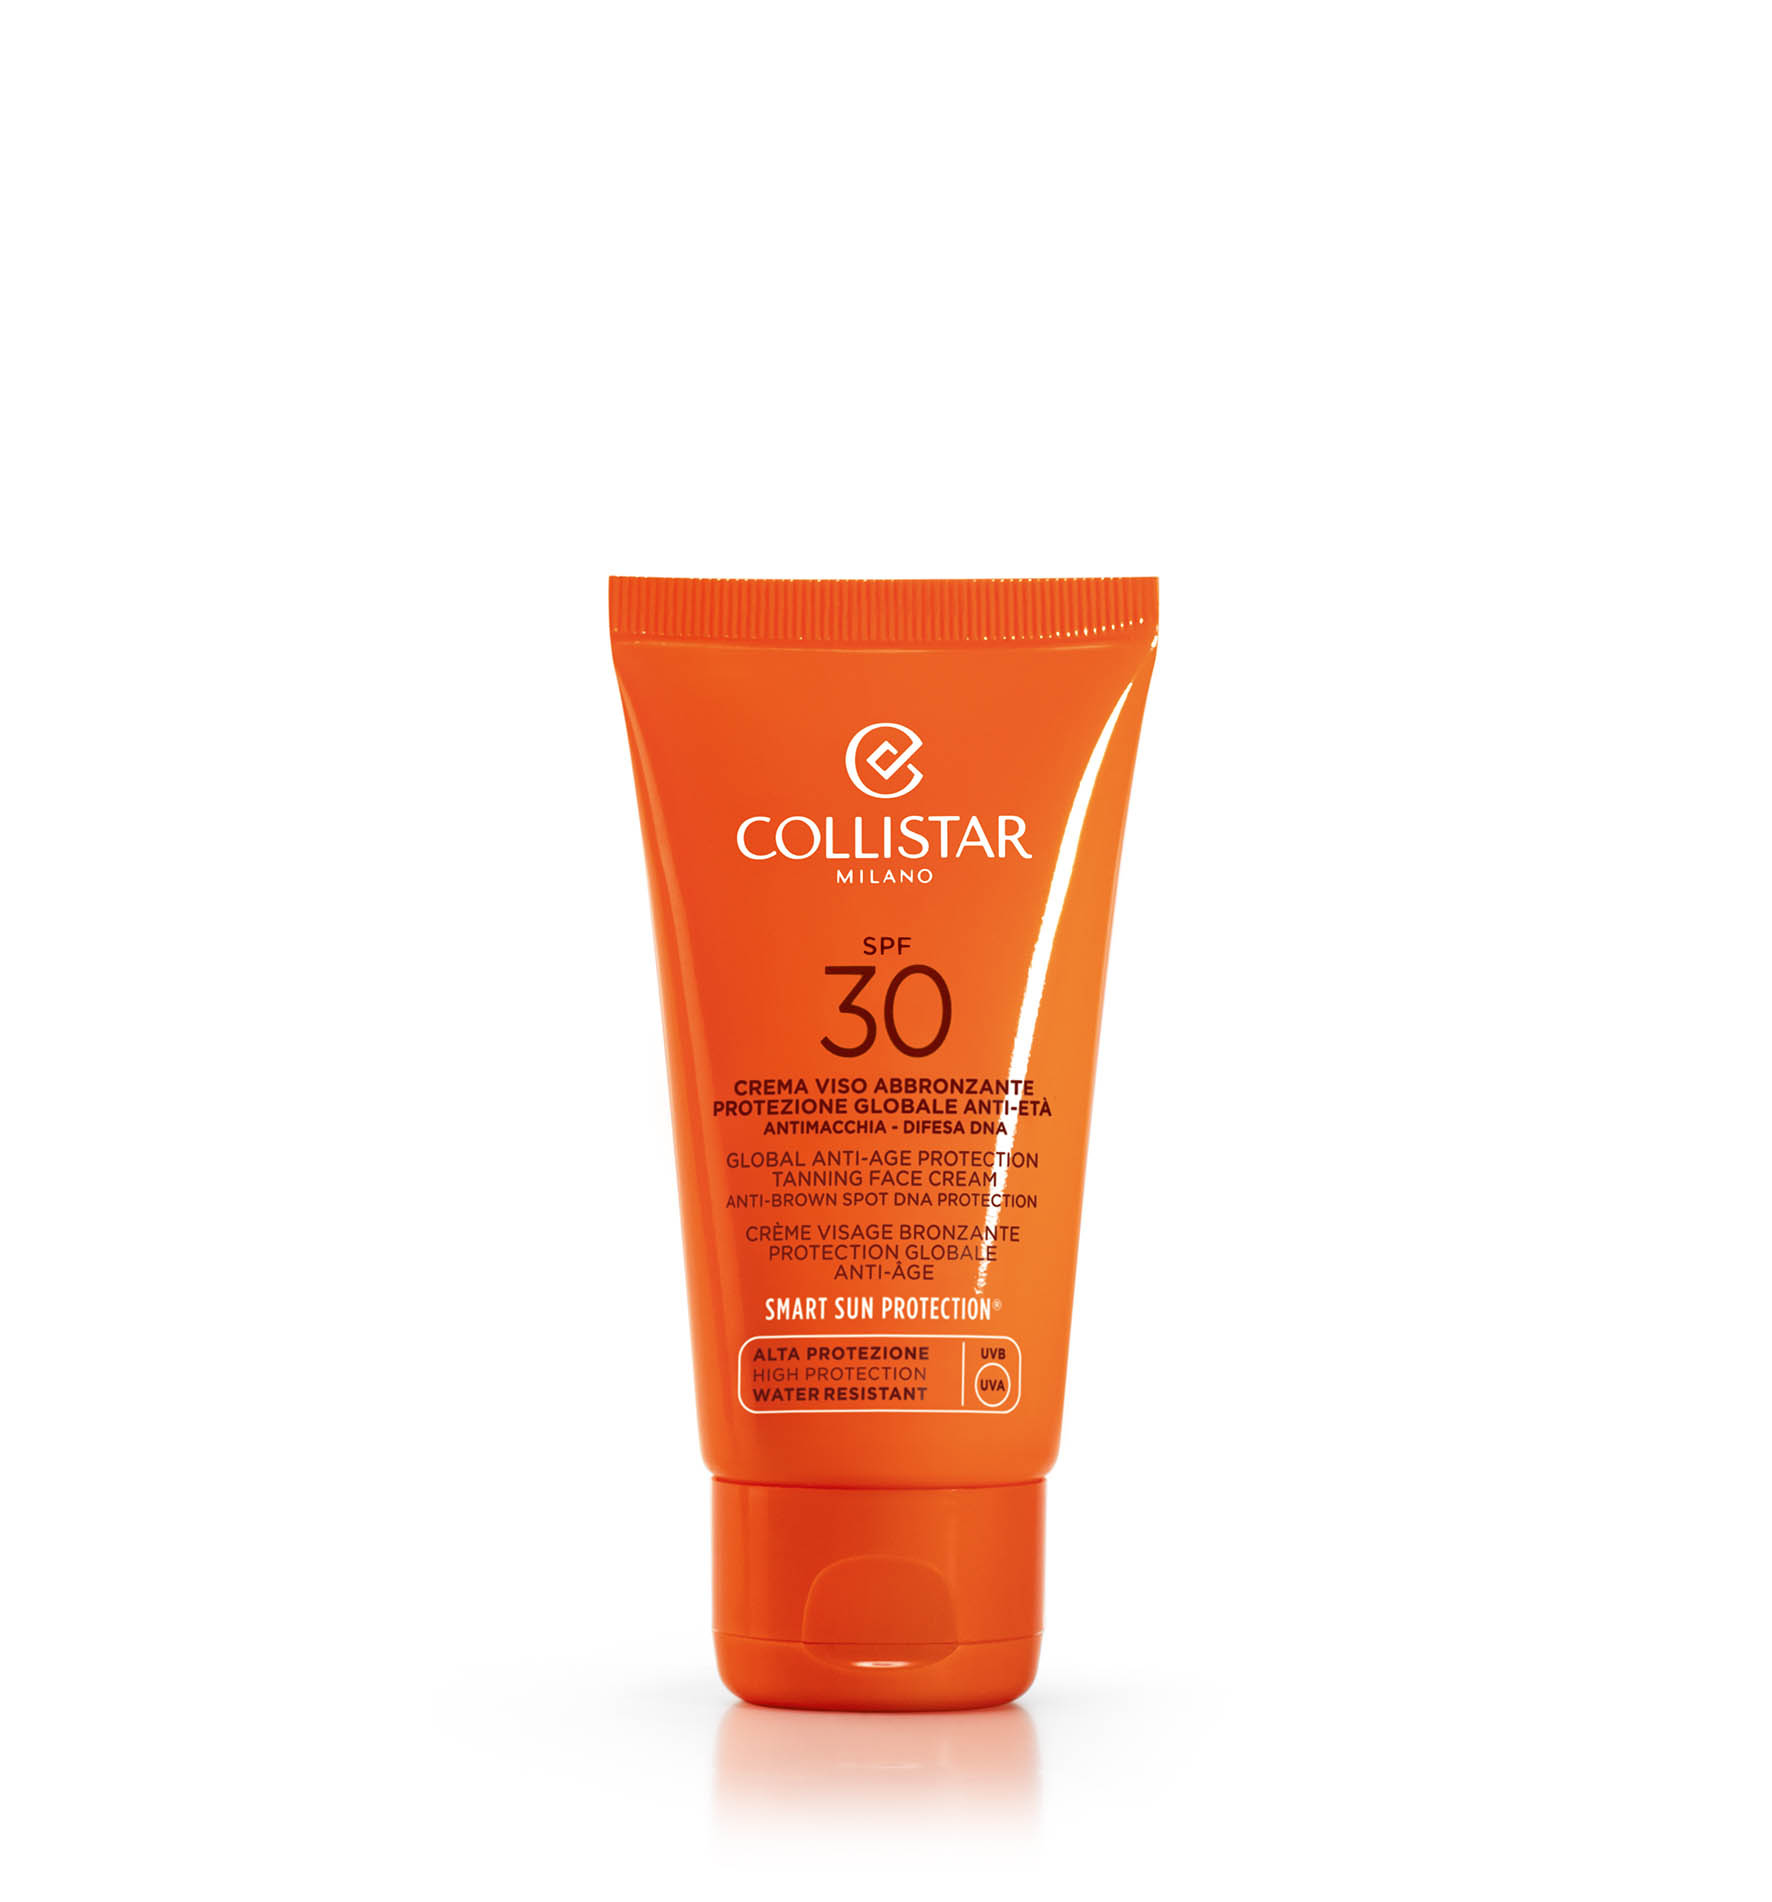 GLOBAL ANTI-AGE PROTECTION TANNING FACE CREAM SPF 30 - BESCHERMING | Collistar - Shop Online Ufficiale